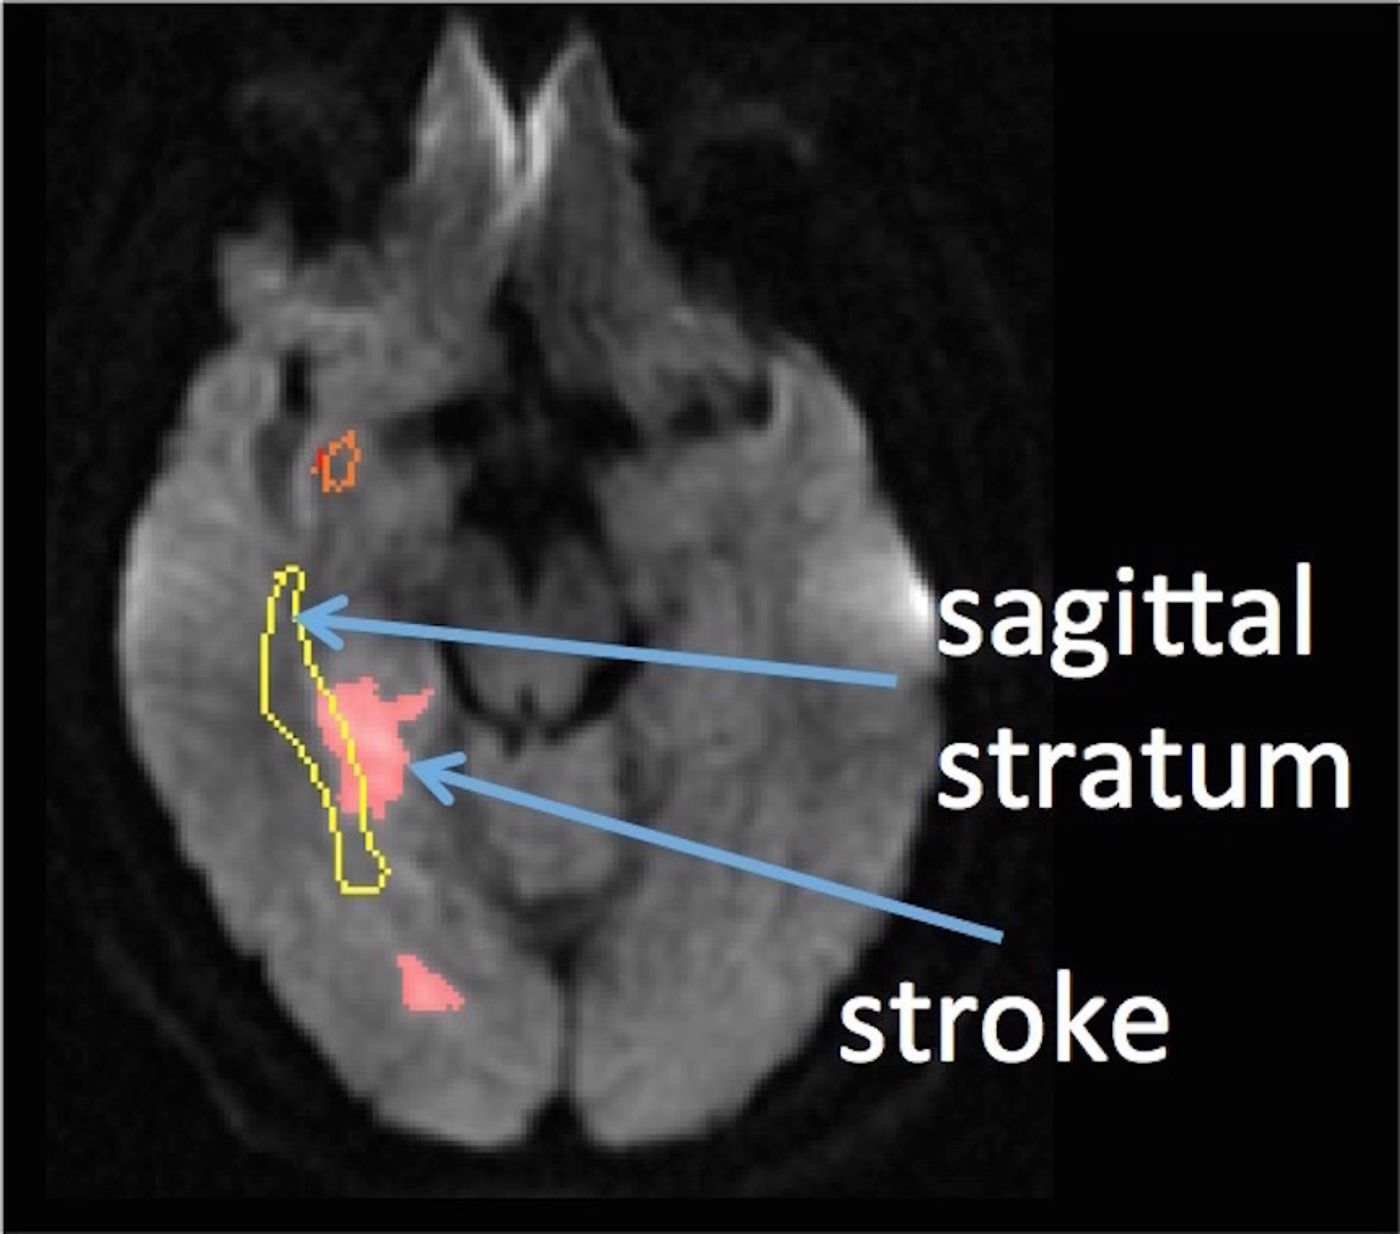 The area of the brain credited with recognizing sarcasm overlaps area impacted by stroke in test subjects.